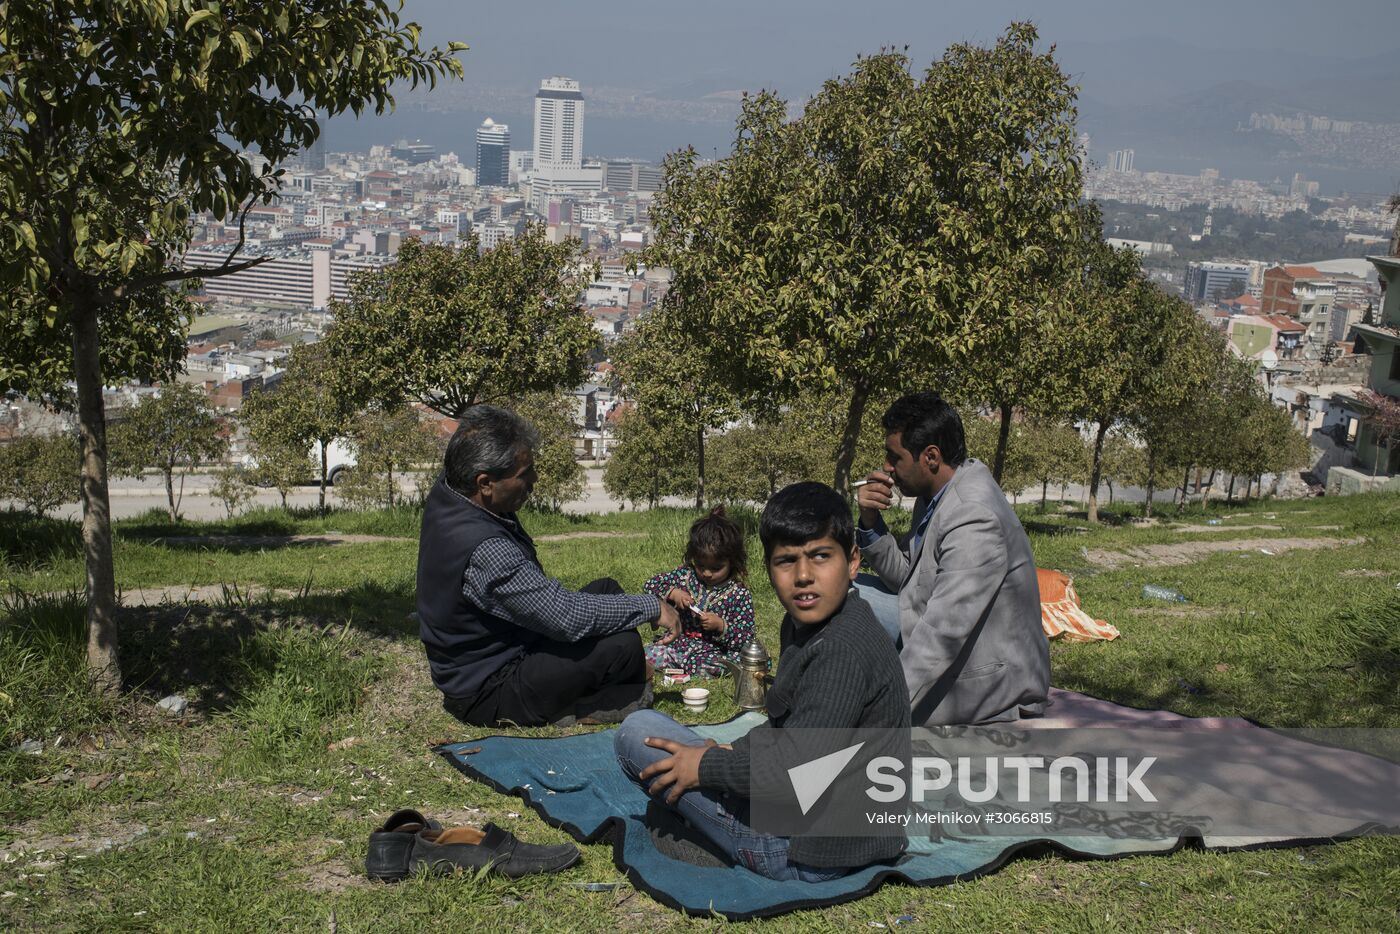 Syrian refugges in Turkey's Izmir Province